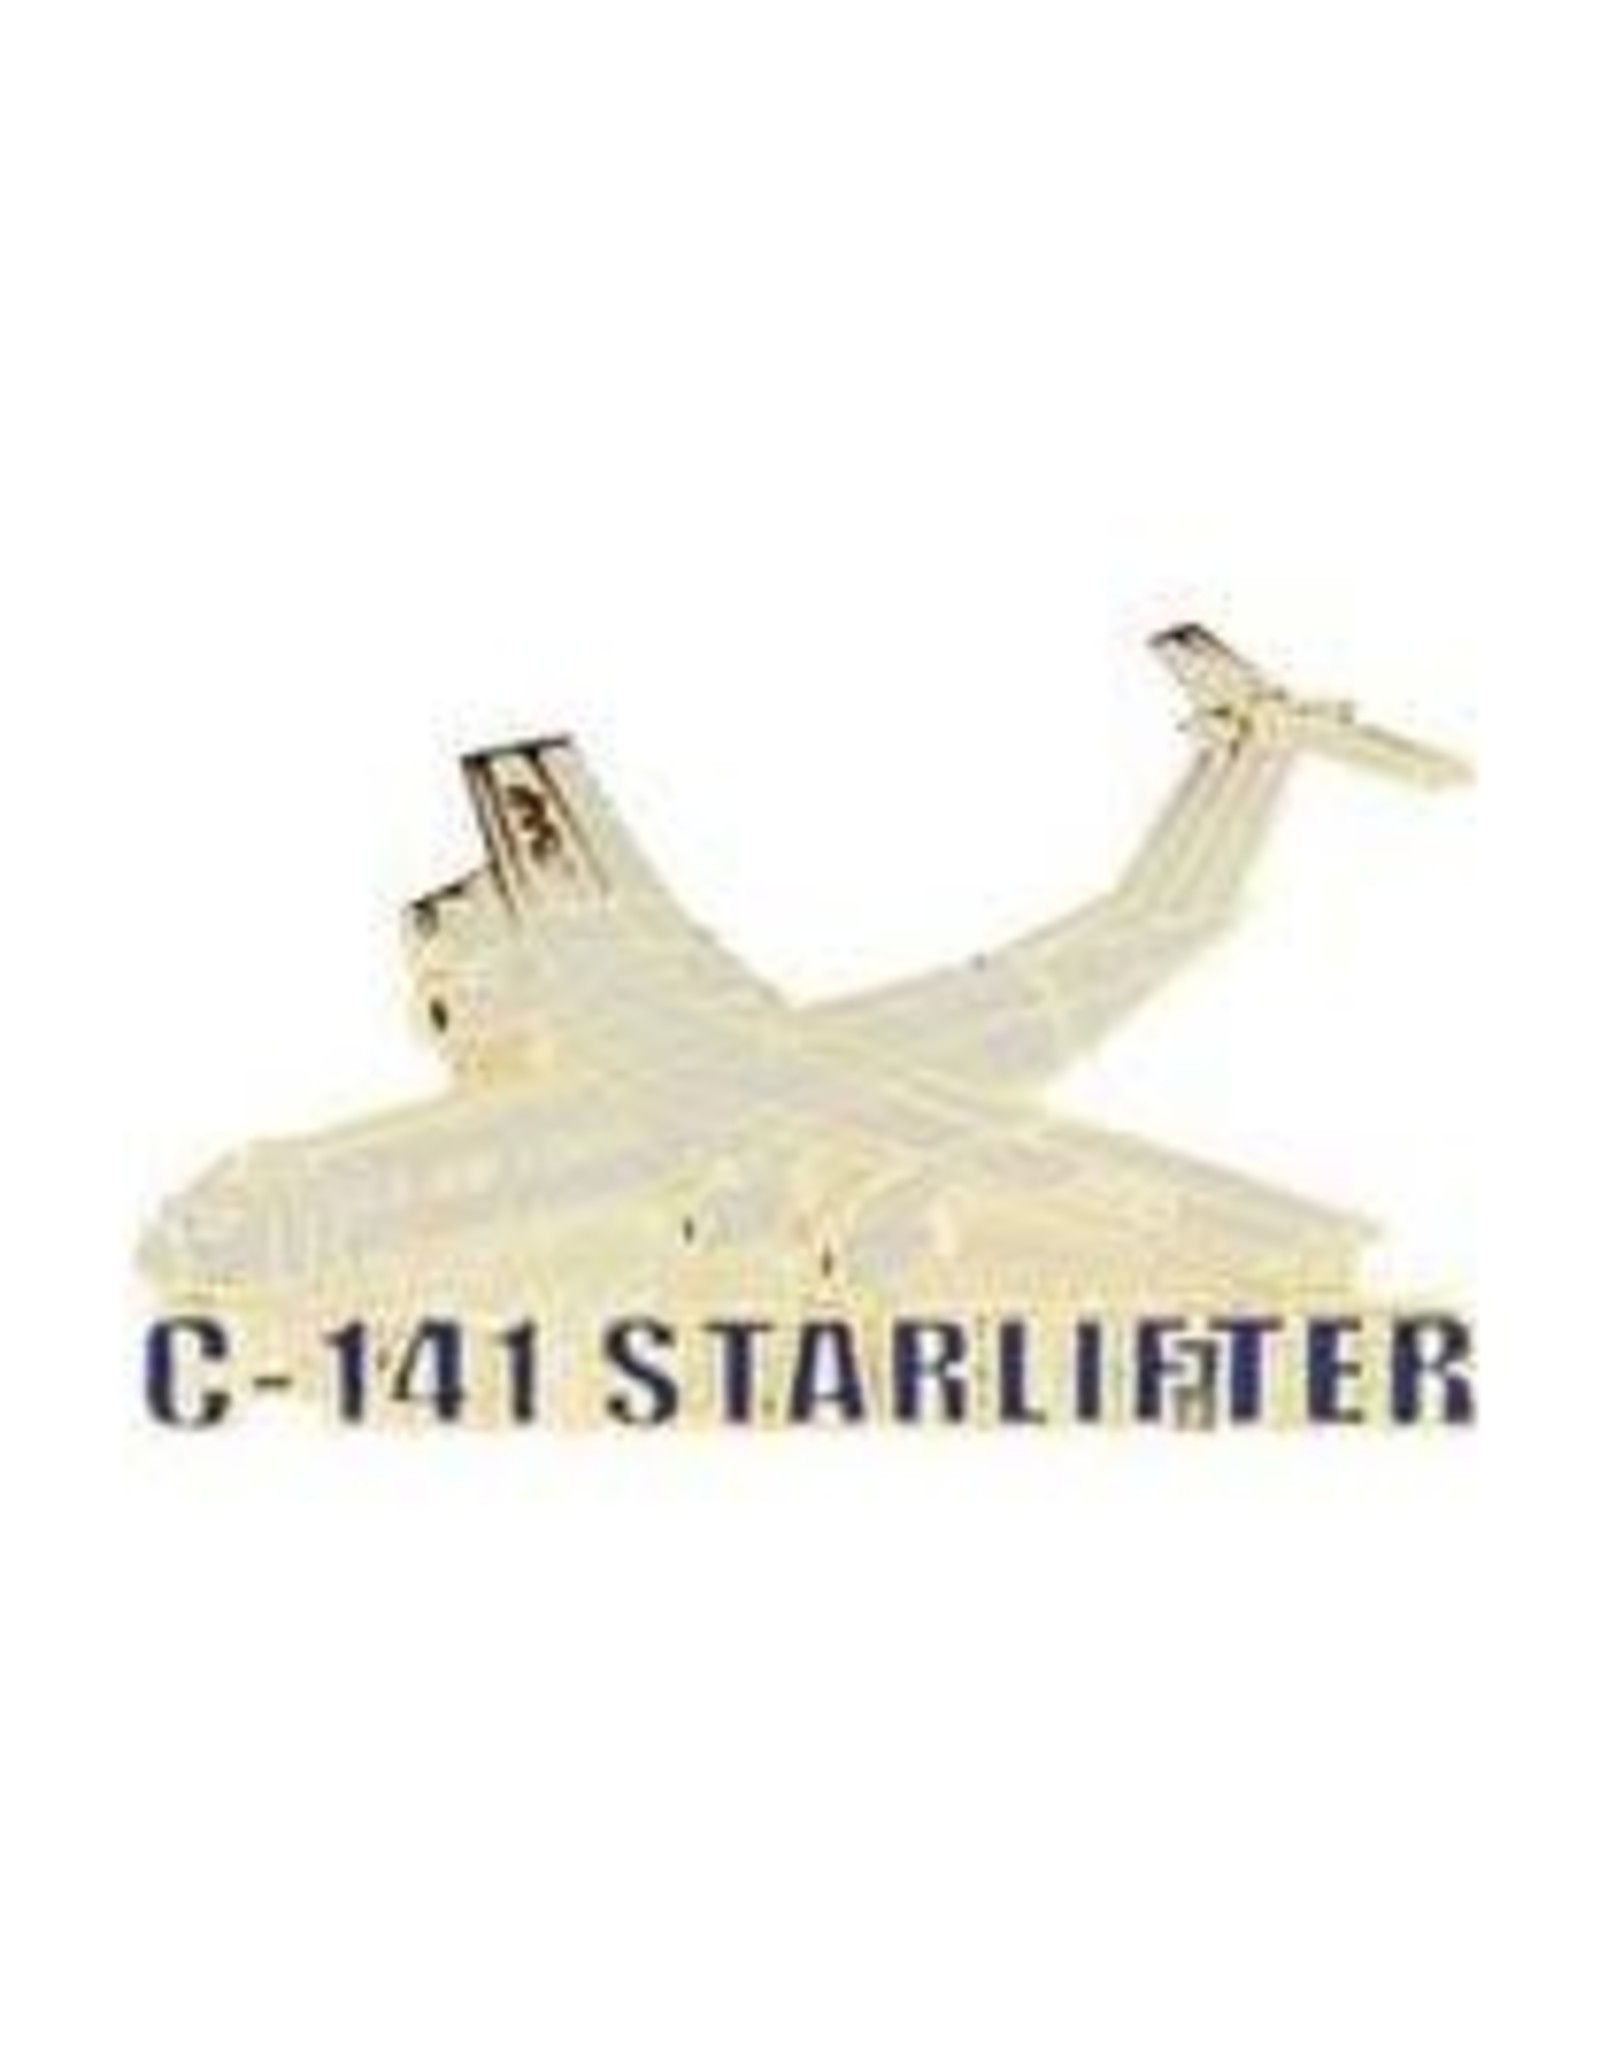 Pin - Airplane C-141 Starlifter